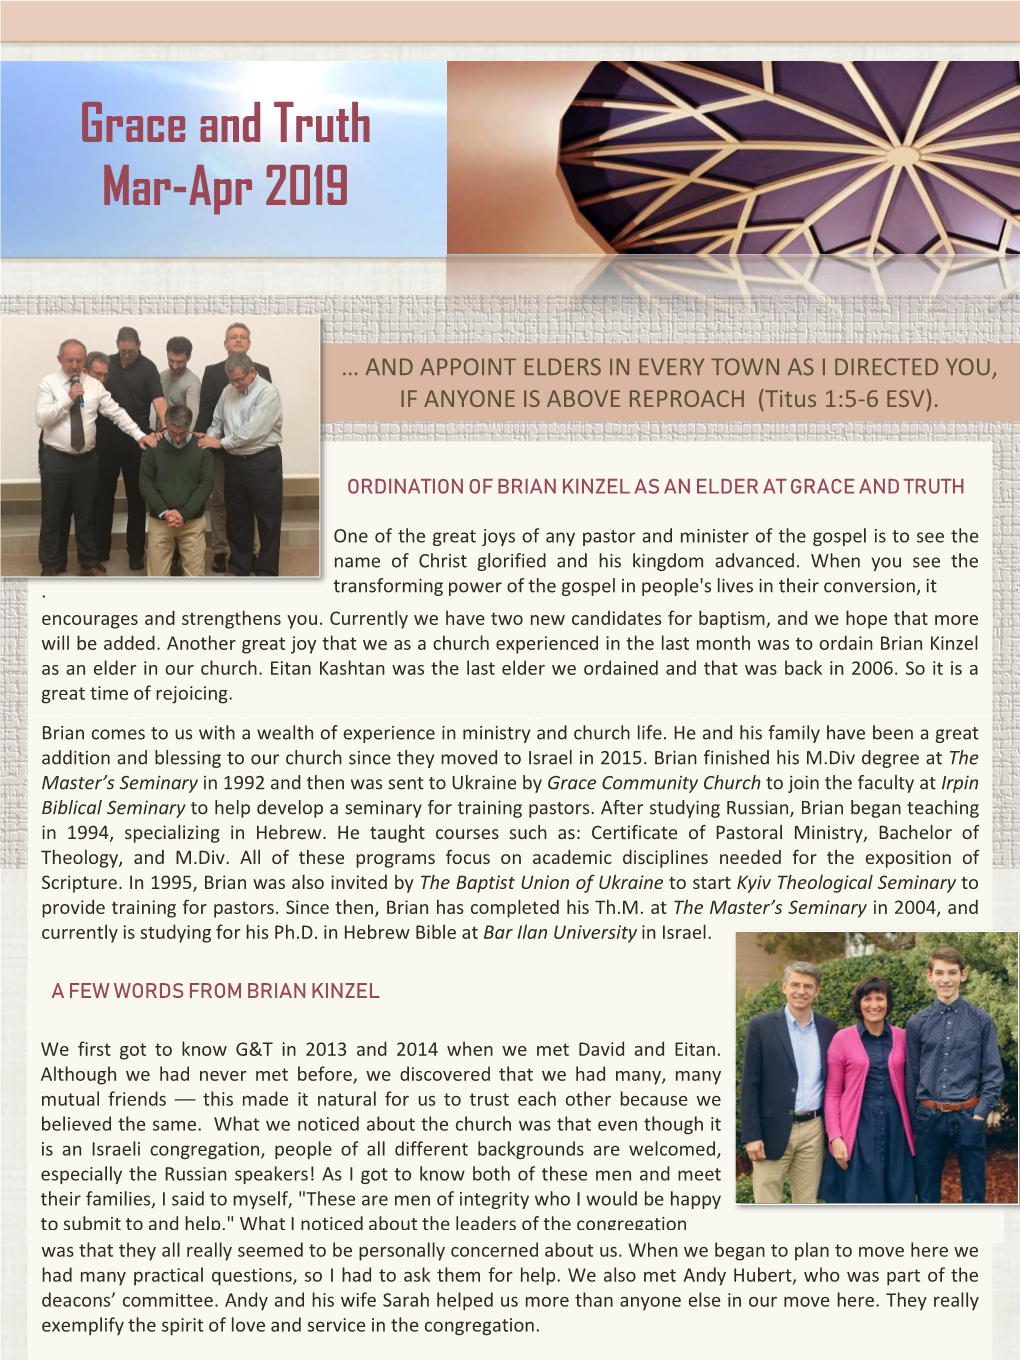 Grace and Truth Mar-Apr 2019